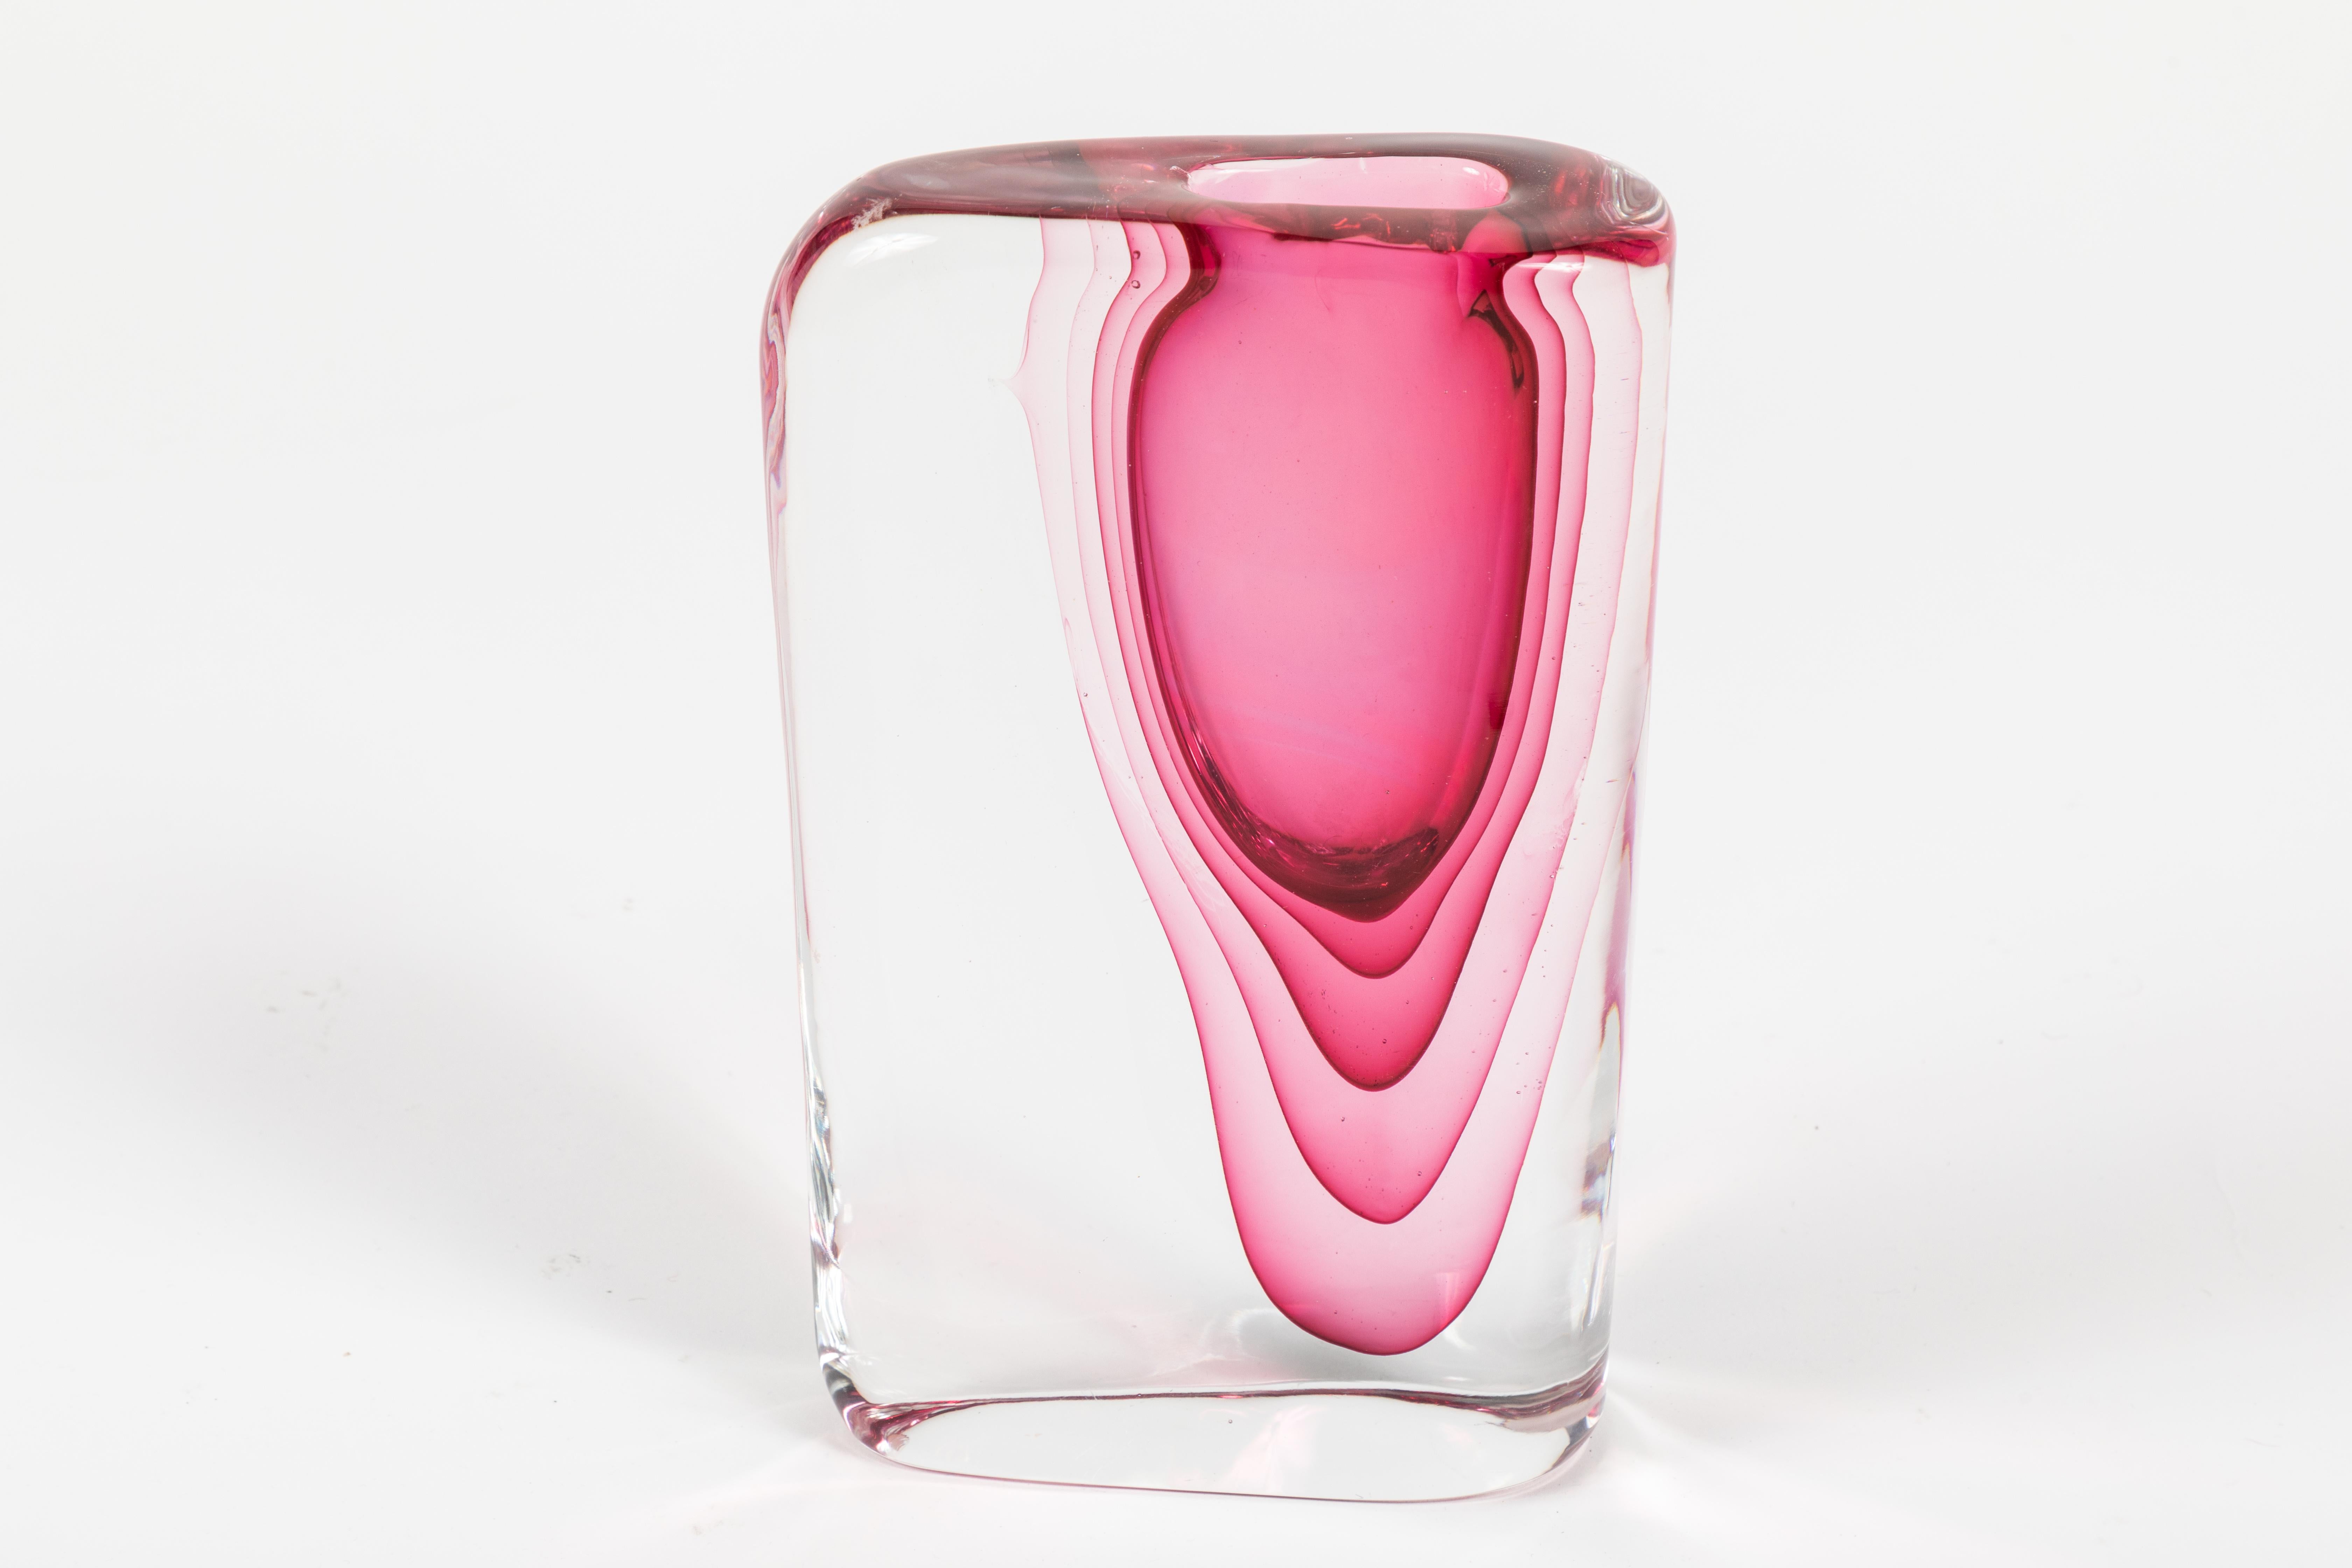 A vivid and striking Sasso Vase designed by Antonio da Ros and made by the Murano glass maker Chenedese. This vase exhibits the beautiful submersso technique this vase is know for. A deep cranberry pink/red color repeats in the body of the vase.